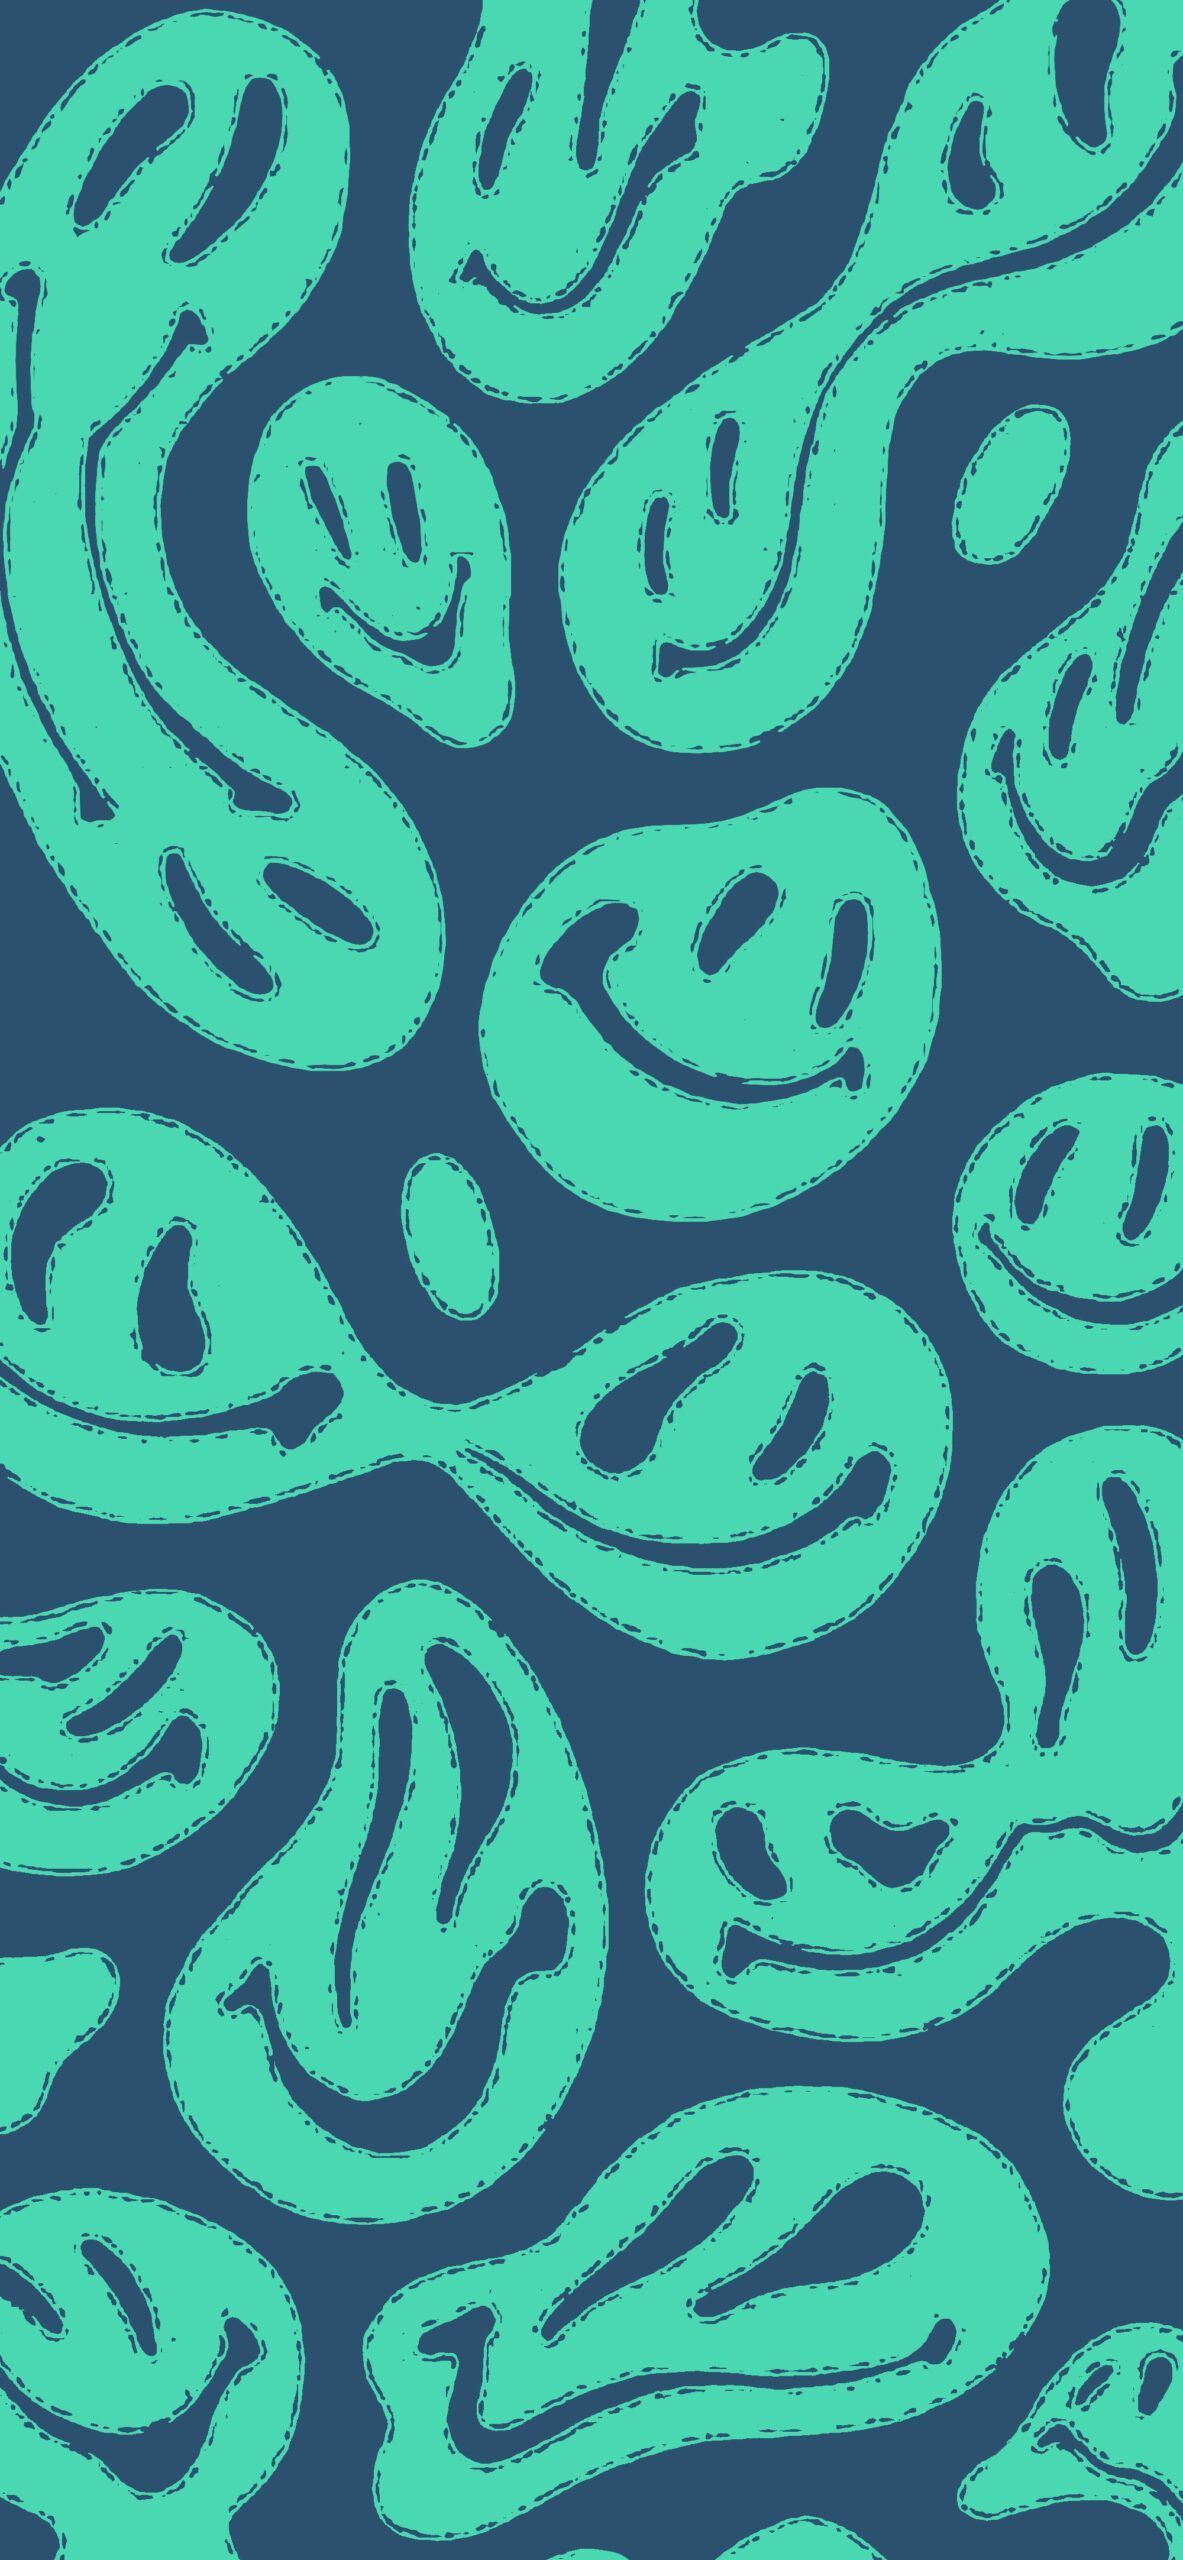 A pattern of green leaves on blue background - Colorful, trippy, teal